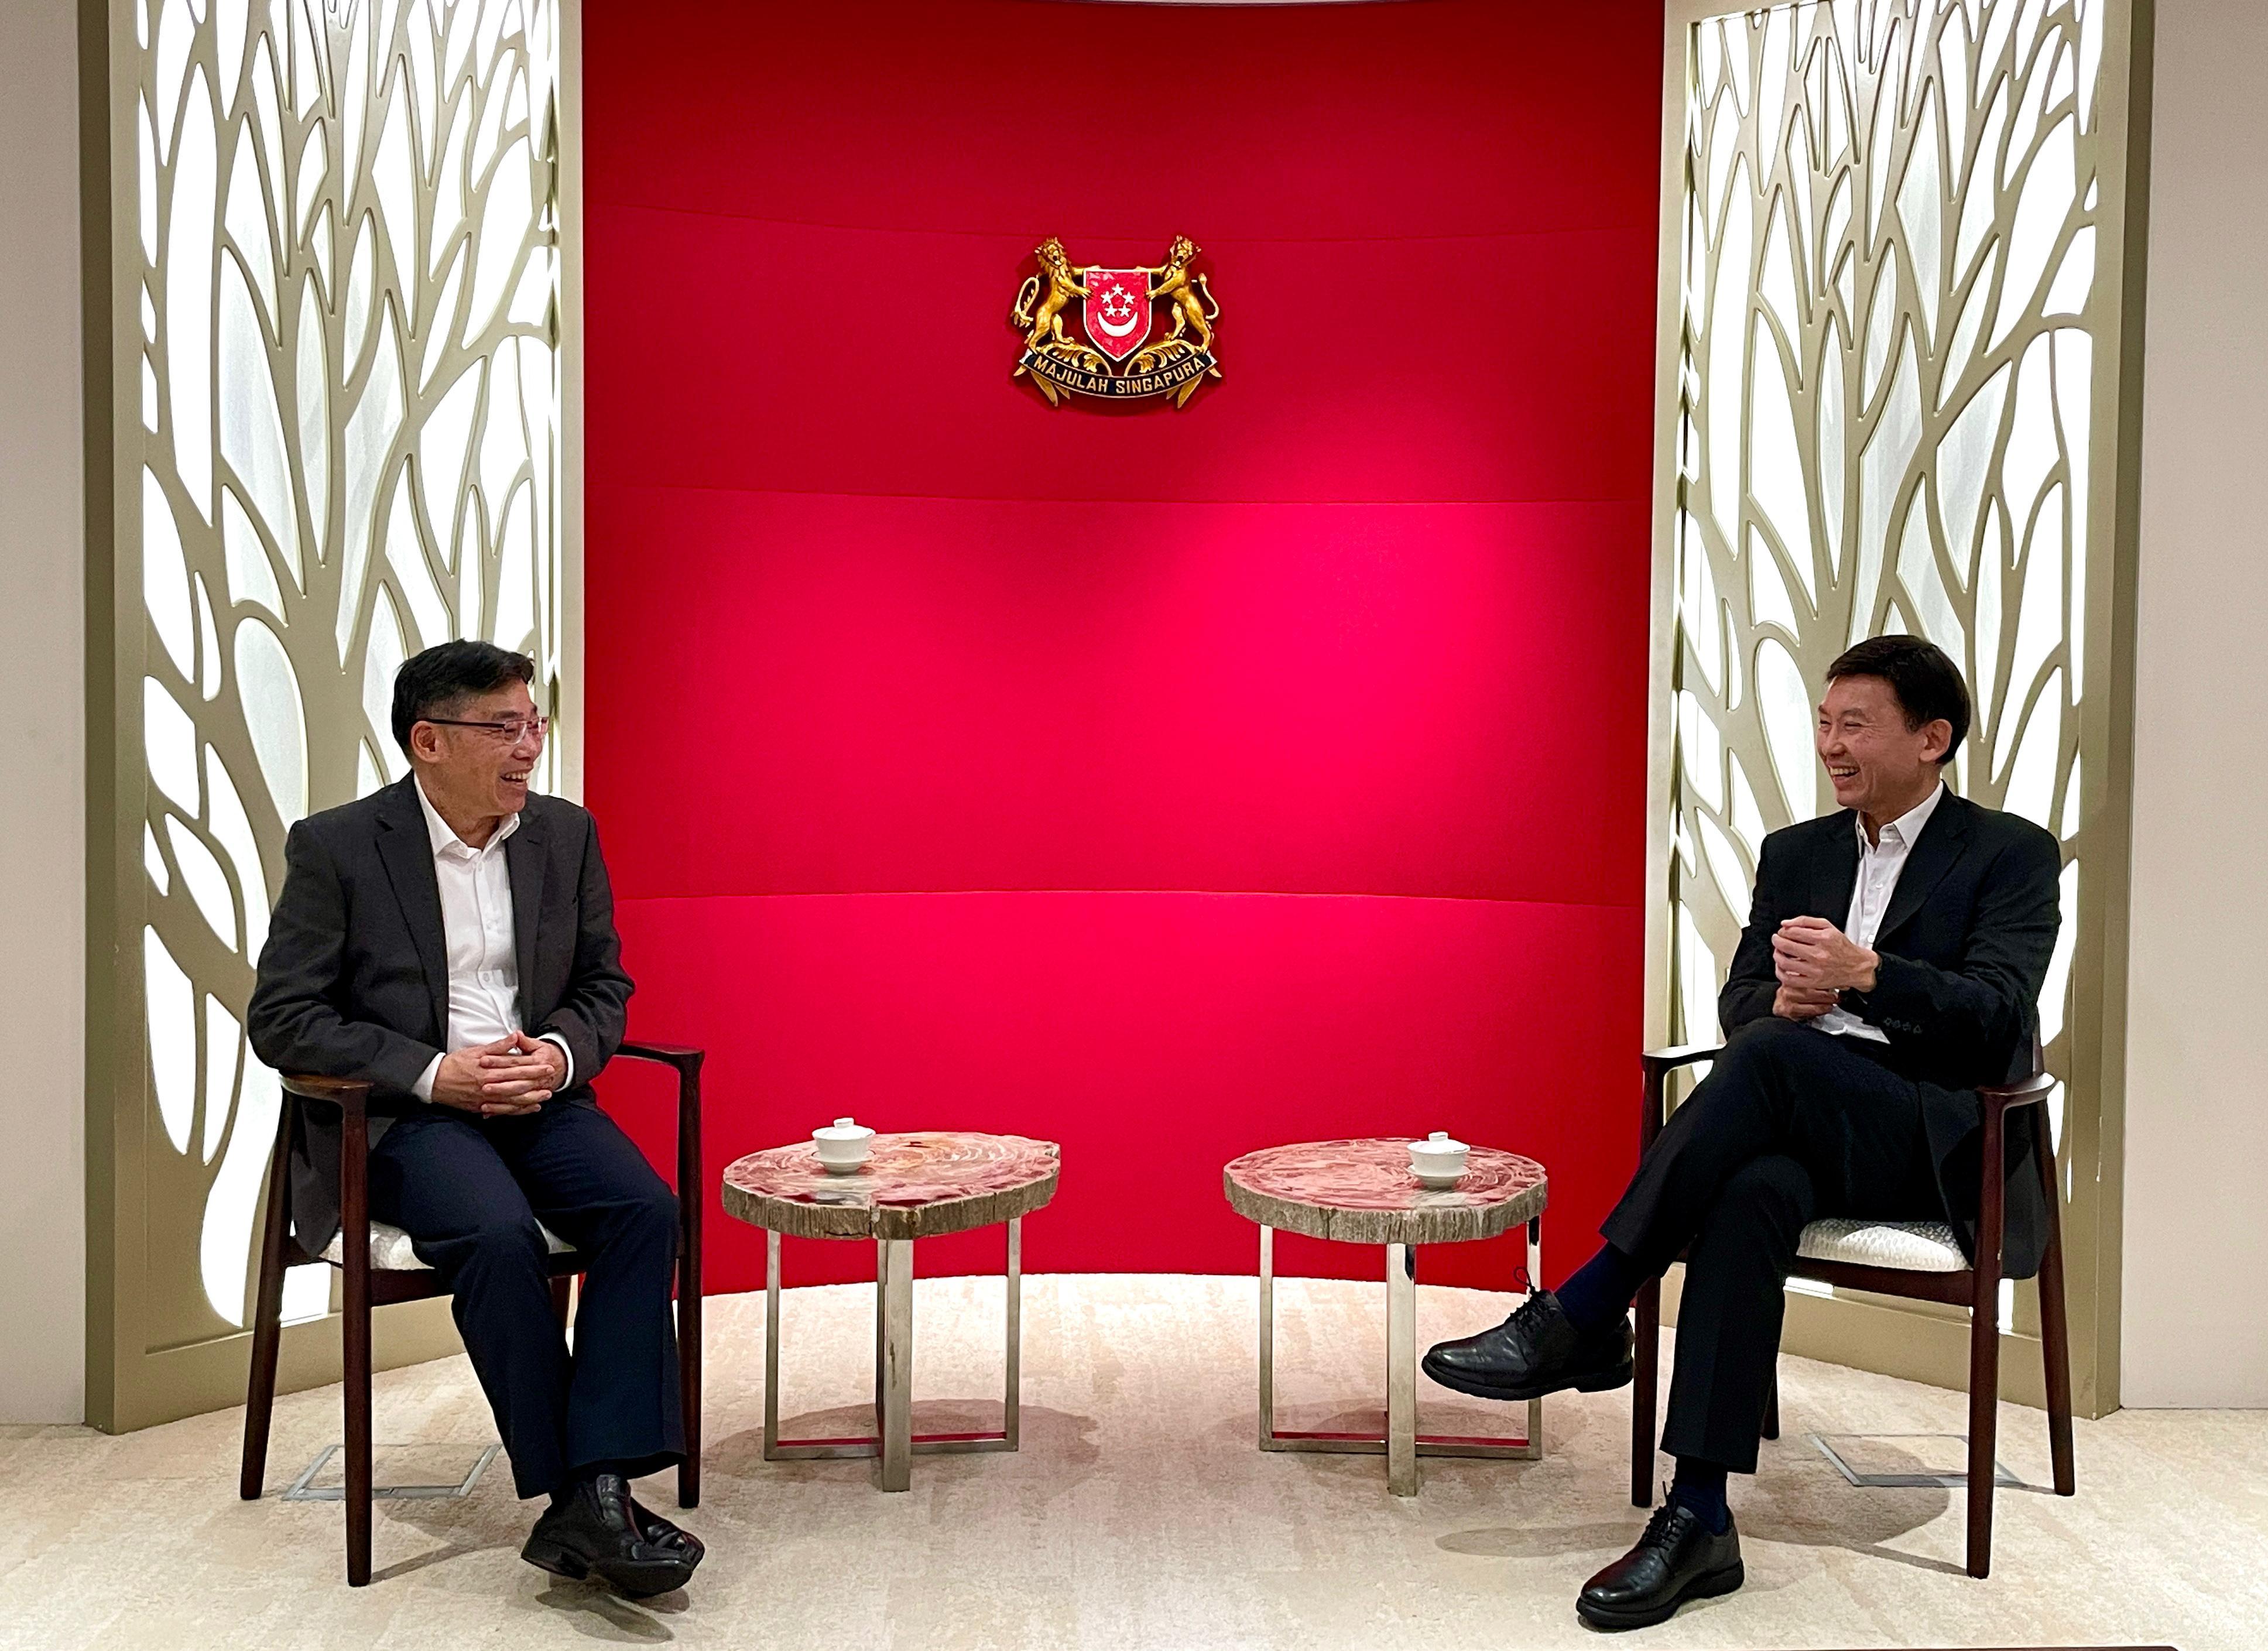 The Secretary for Transport and Logistics, Mr Lam Sai-hung (left), continued his visit to Singapore today (January 31) and had a meeting with the Minister for Transport of Singapore, Mr Chee Hong Tat (right), to exchange views on issues of mutual interest.